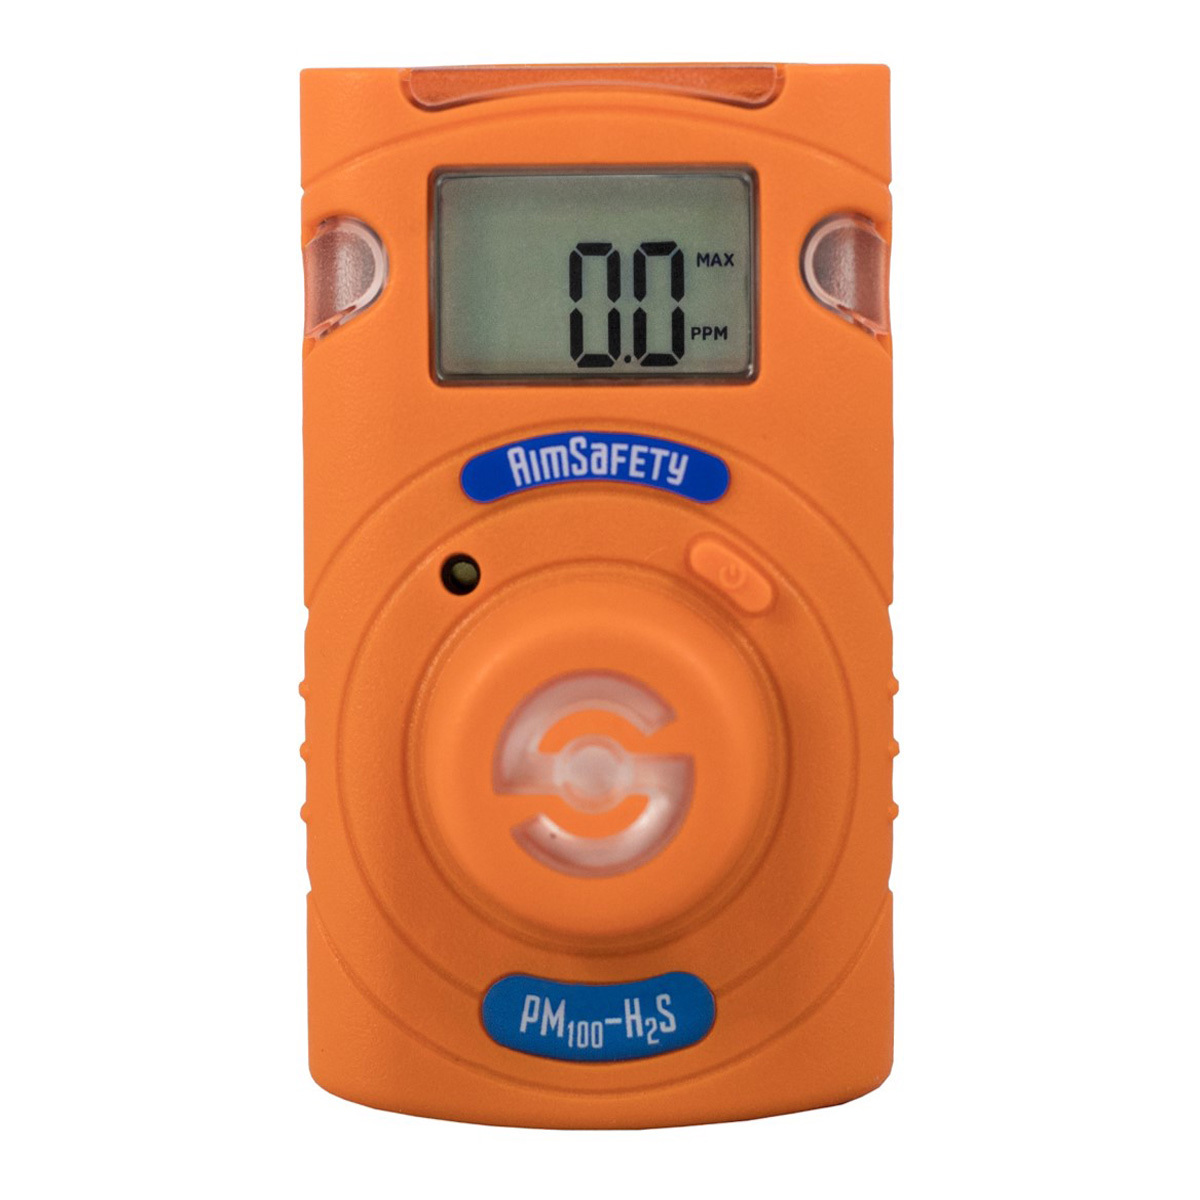 Macurco™ AimSafety PM100-H2S Portable Hydrogen Sulfide Detector